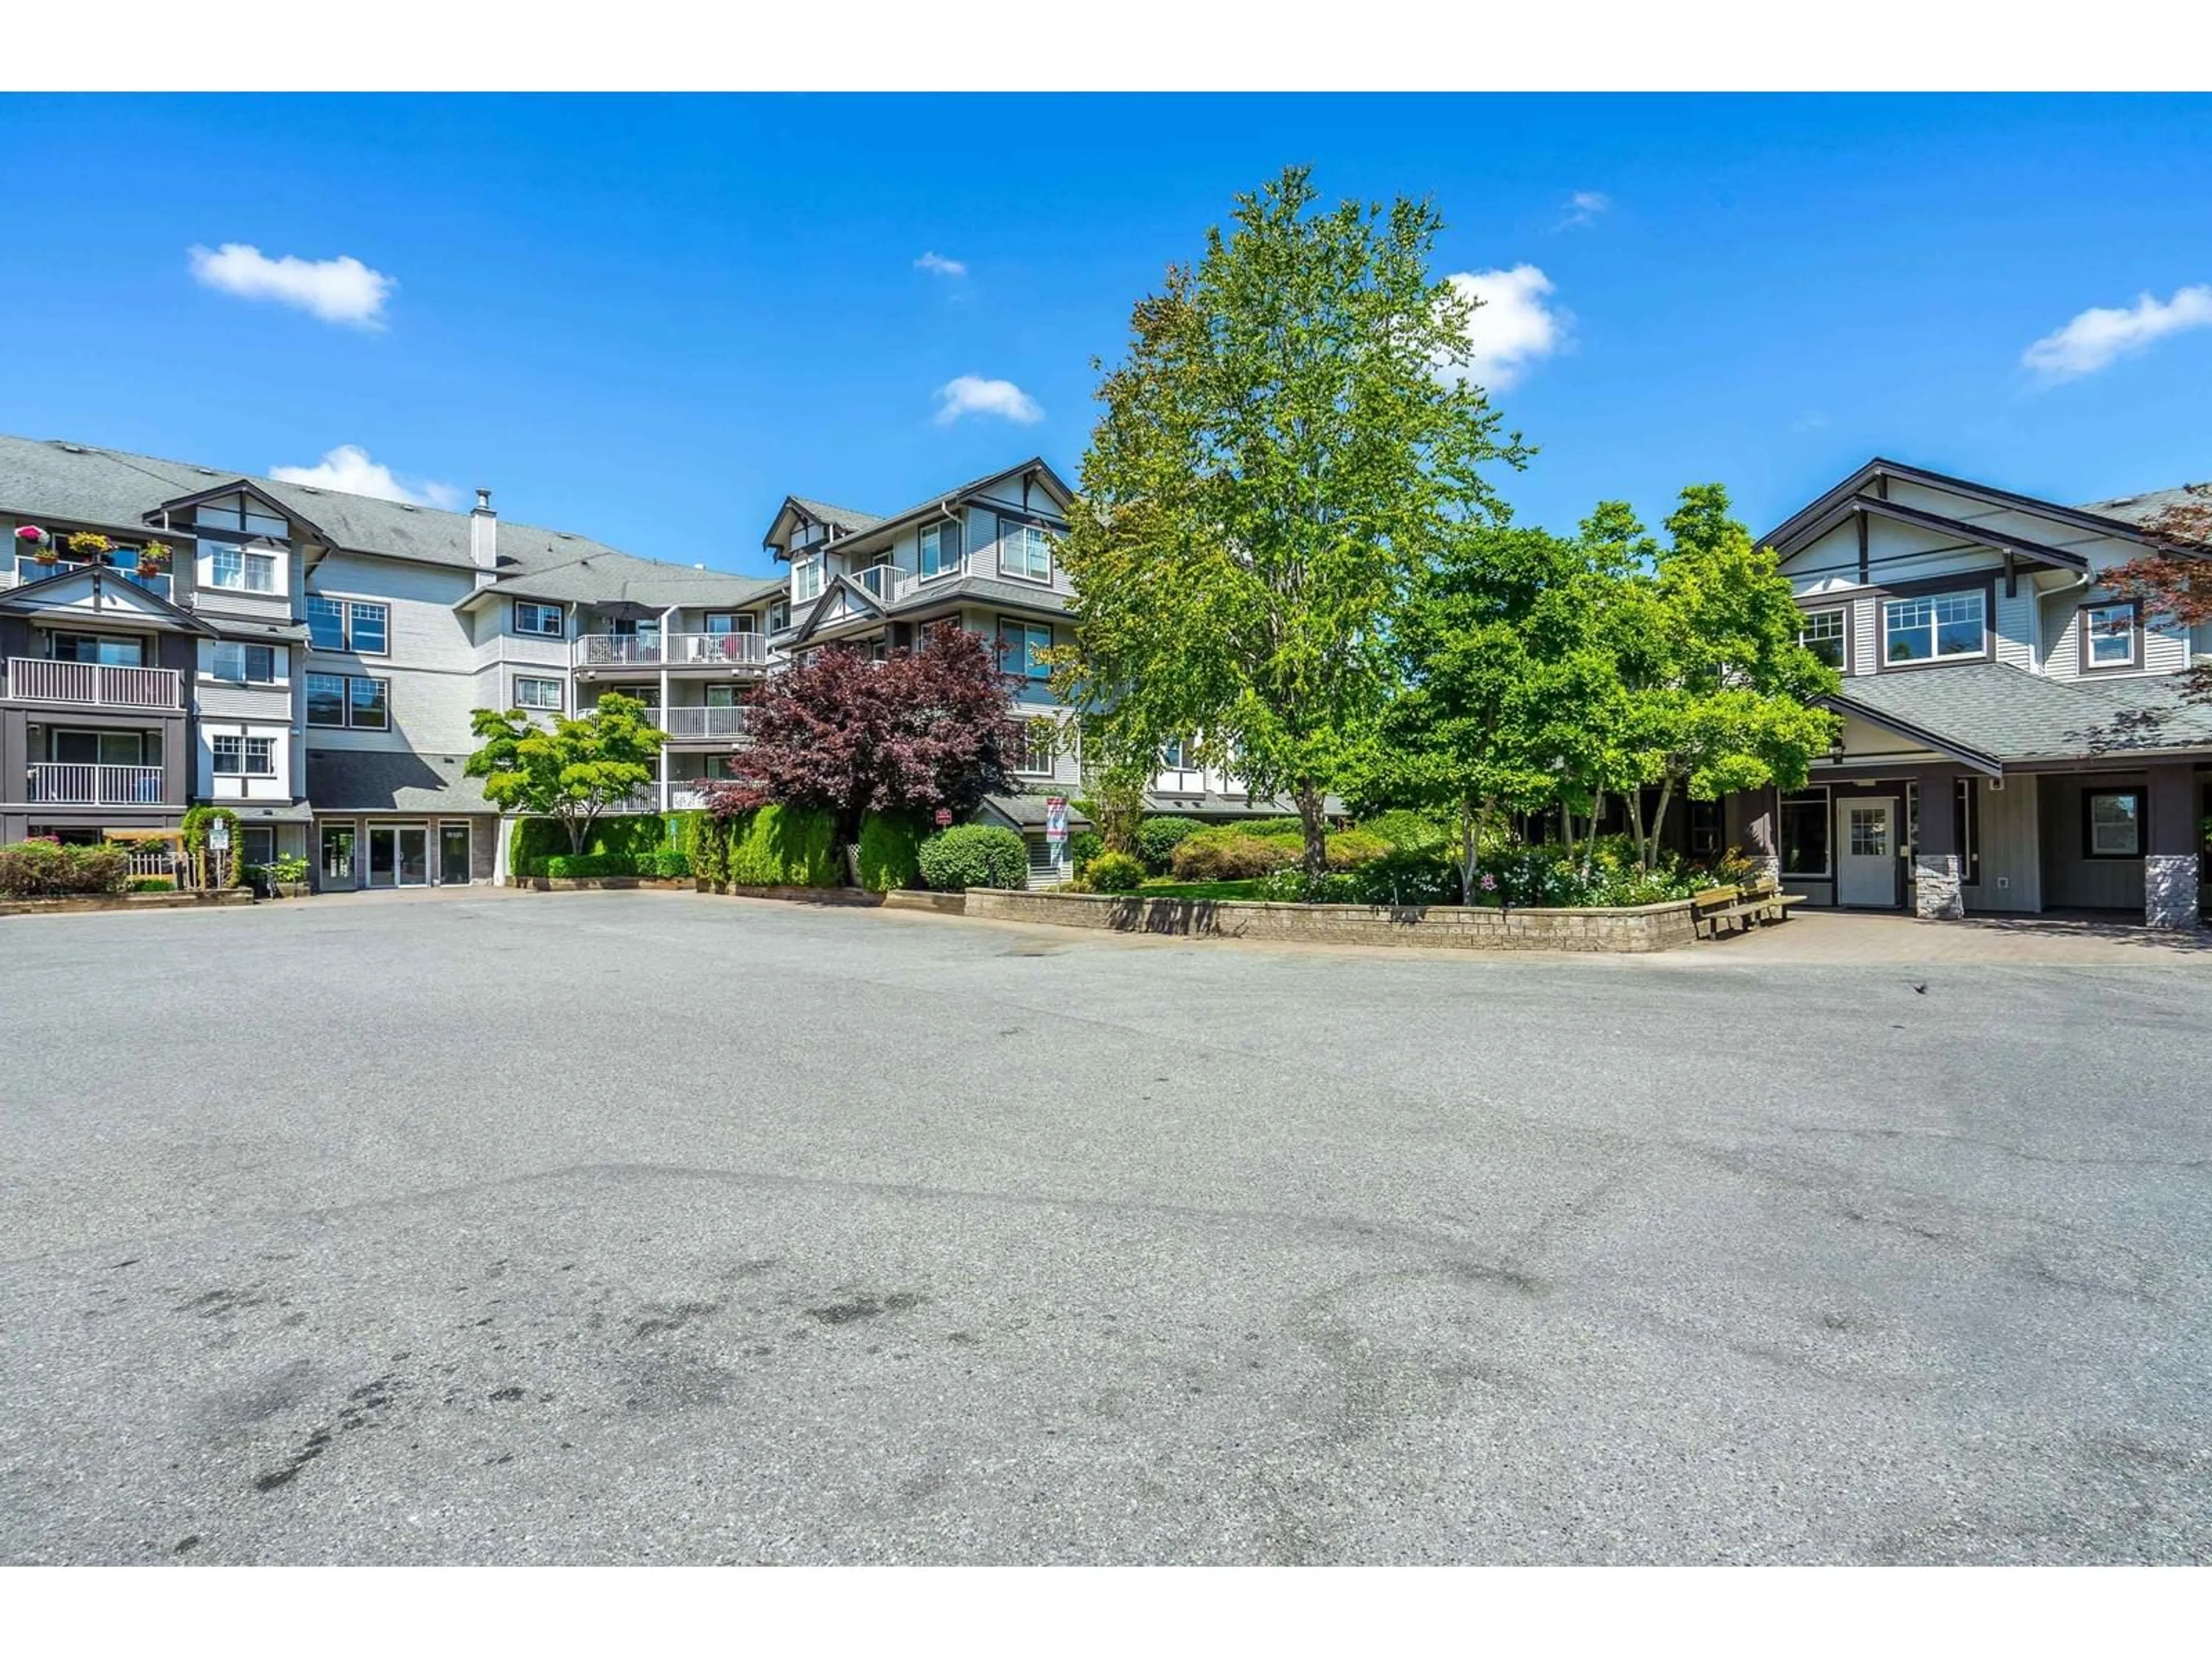 A pic from exterior of the house or condo for 309 19320 65 AVENUE, Surrey British Columbia V4N0A3